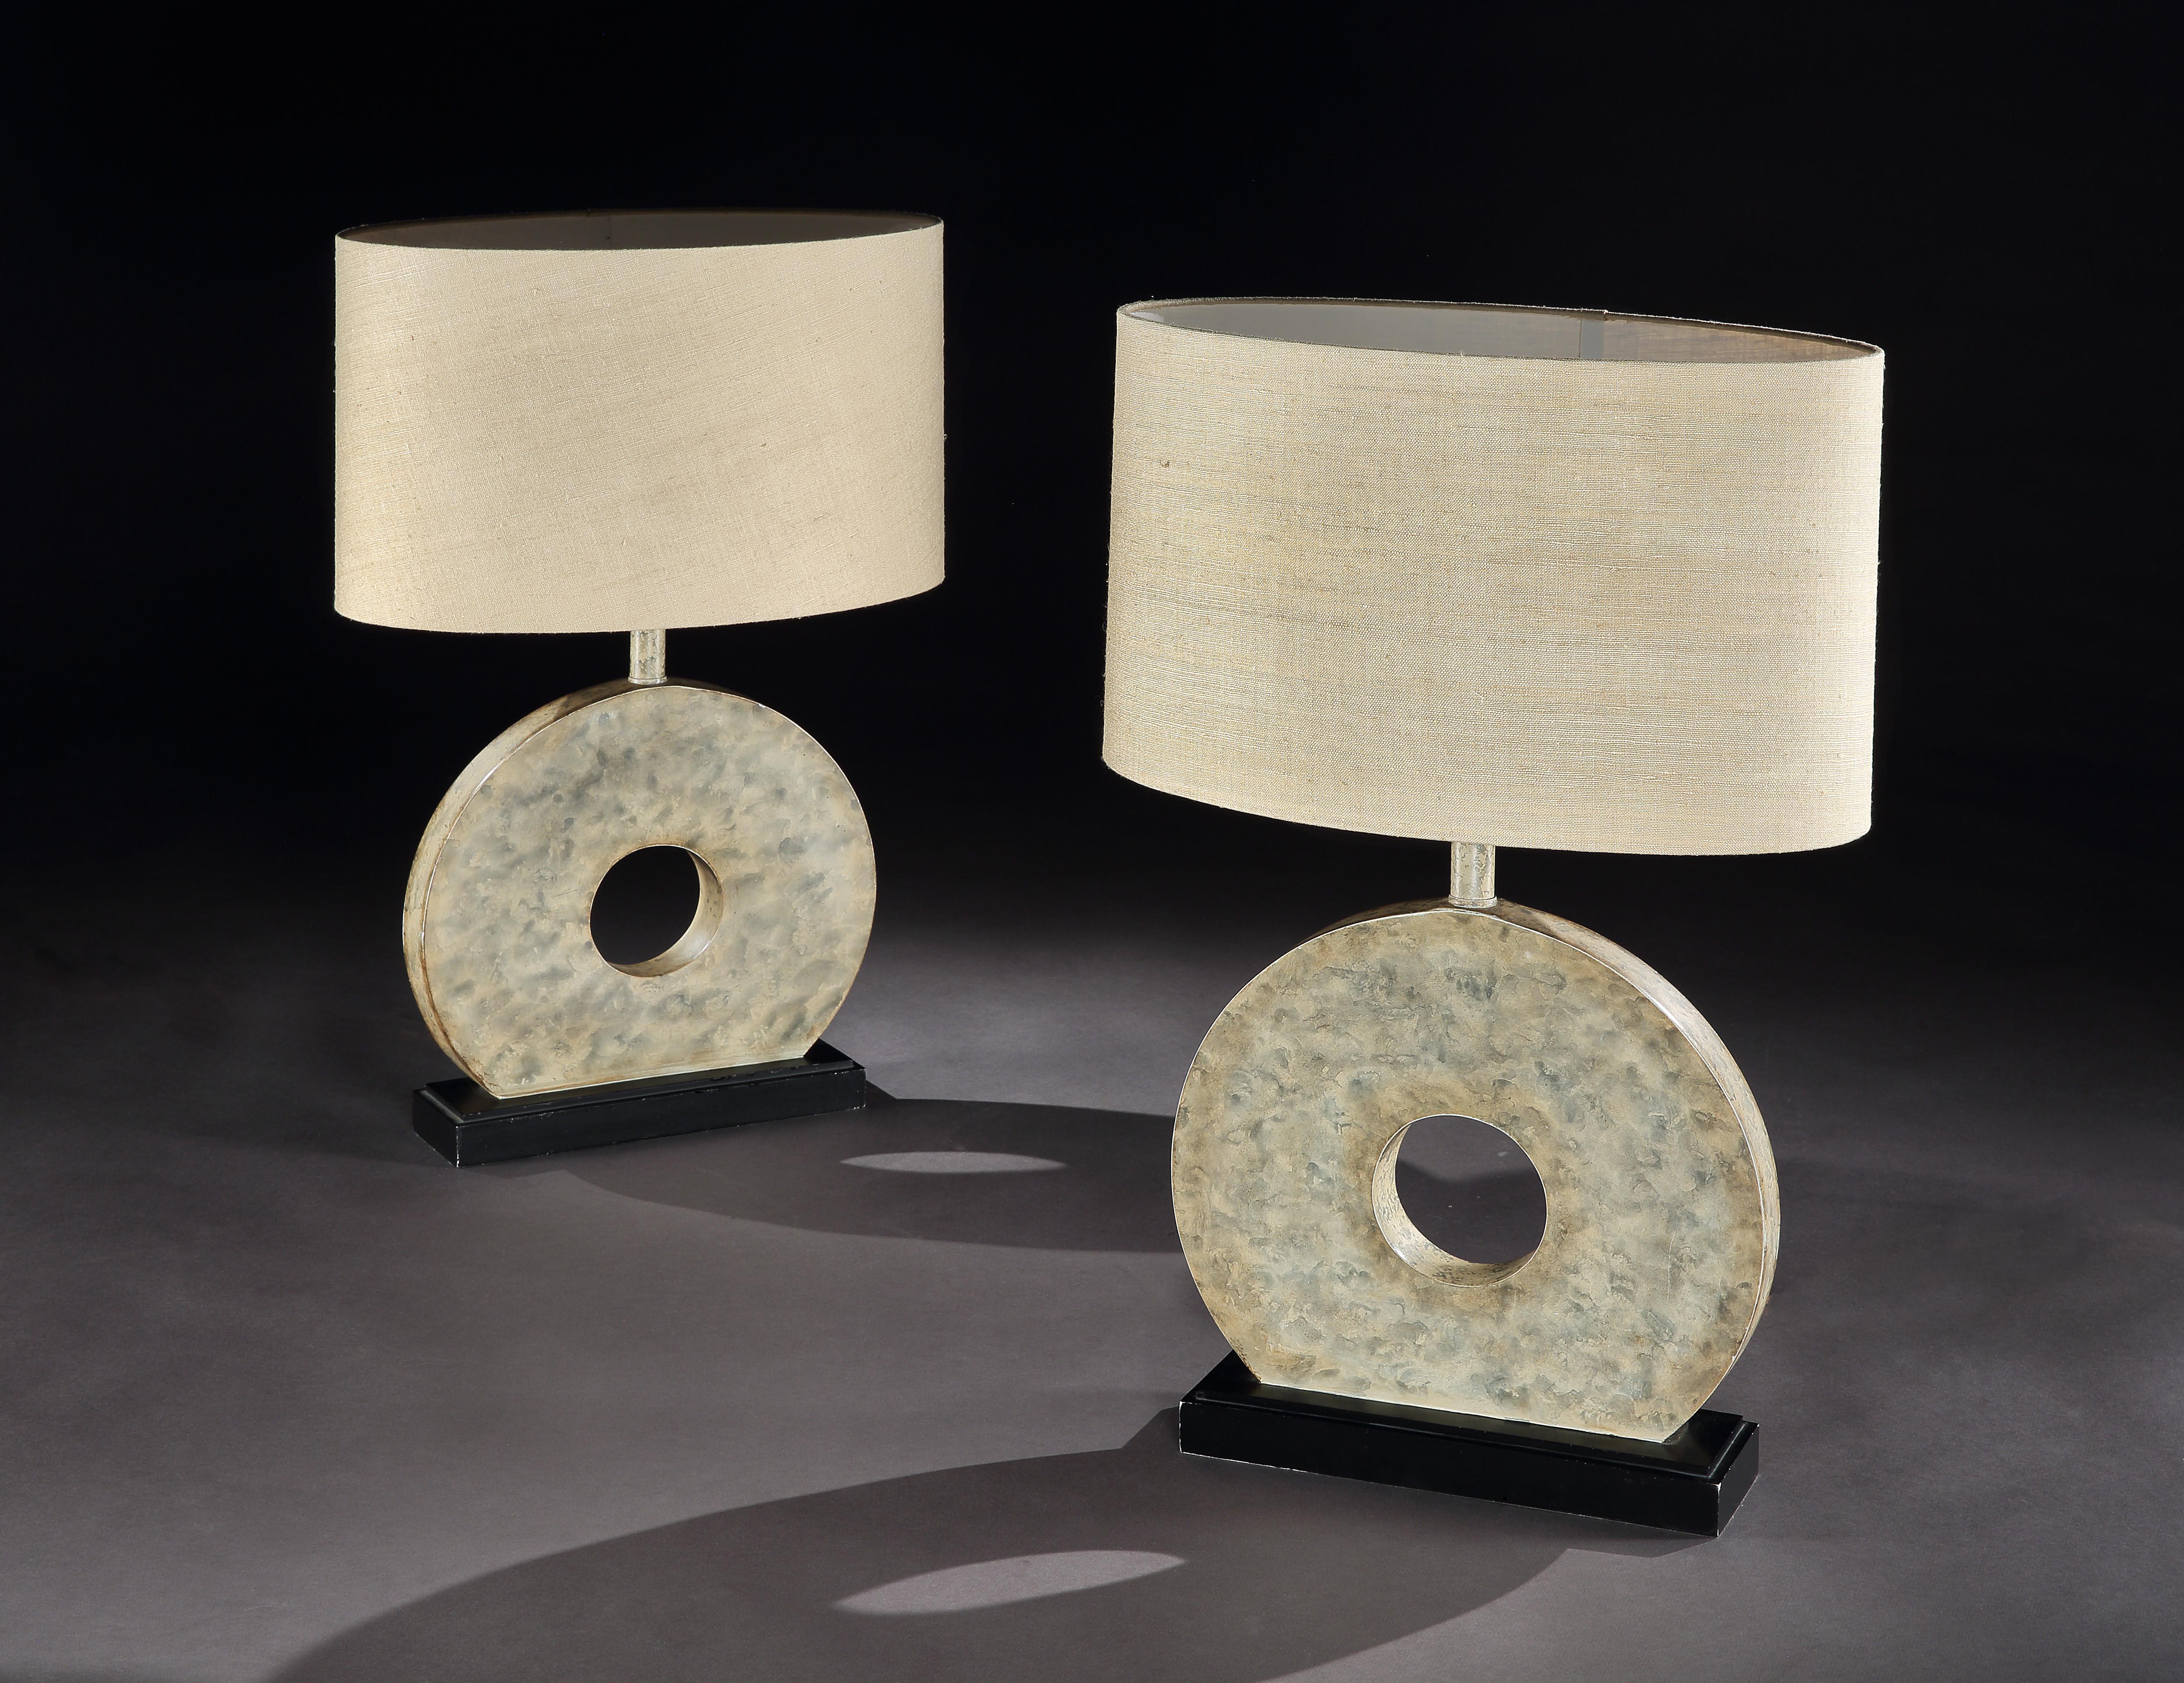 Rare, pair of Mid-Century Modern, marbled, circle, table lamps with custom made, linen shades, 41cm, 16” high
Striking and unusual, injecting Classic design, balance and softness into the interior

- The circle with a central point or hole is an